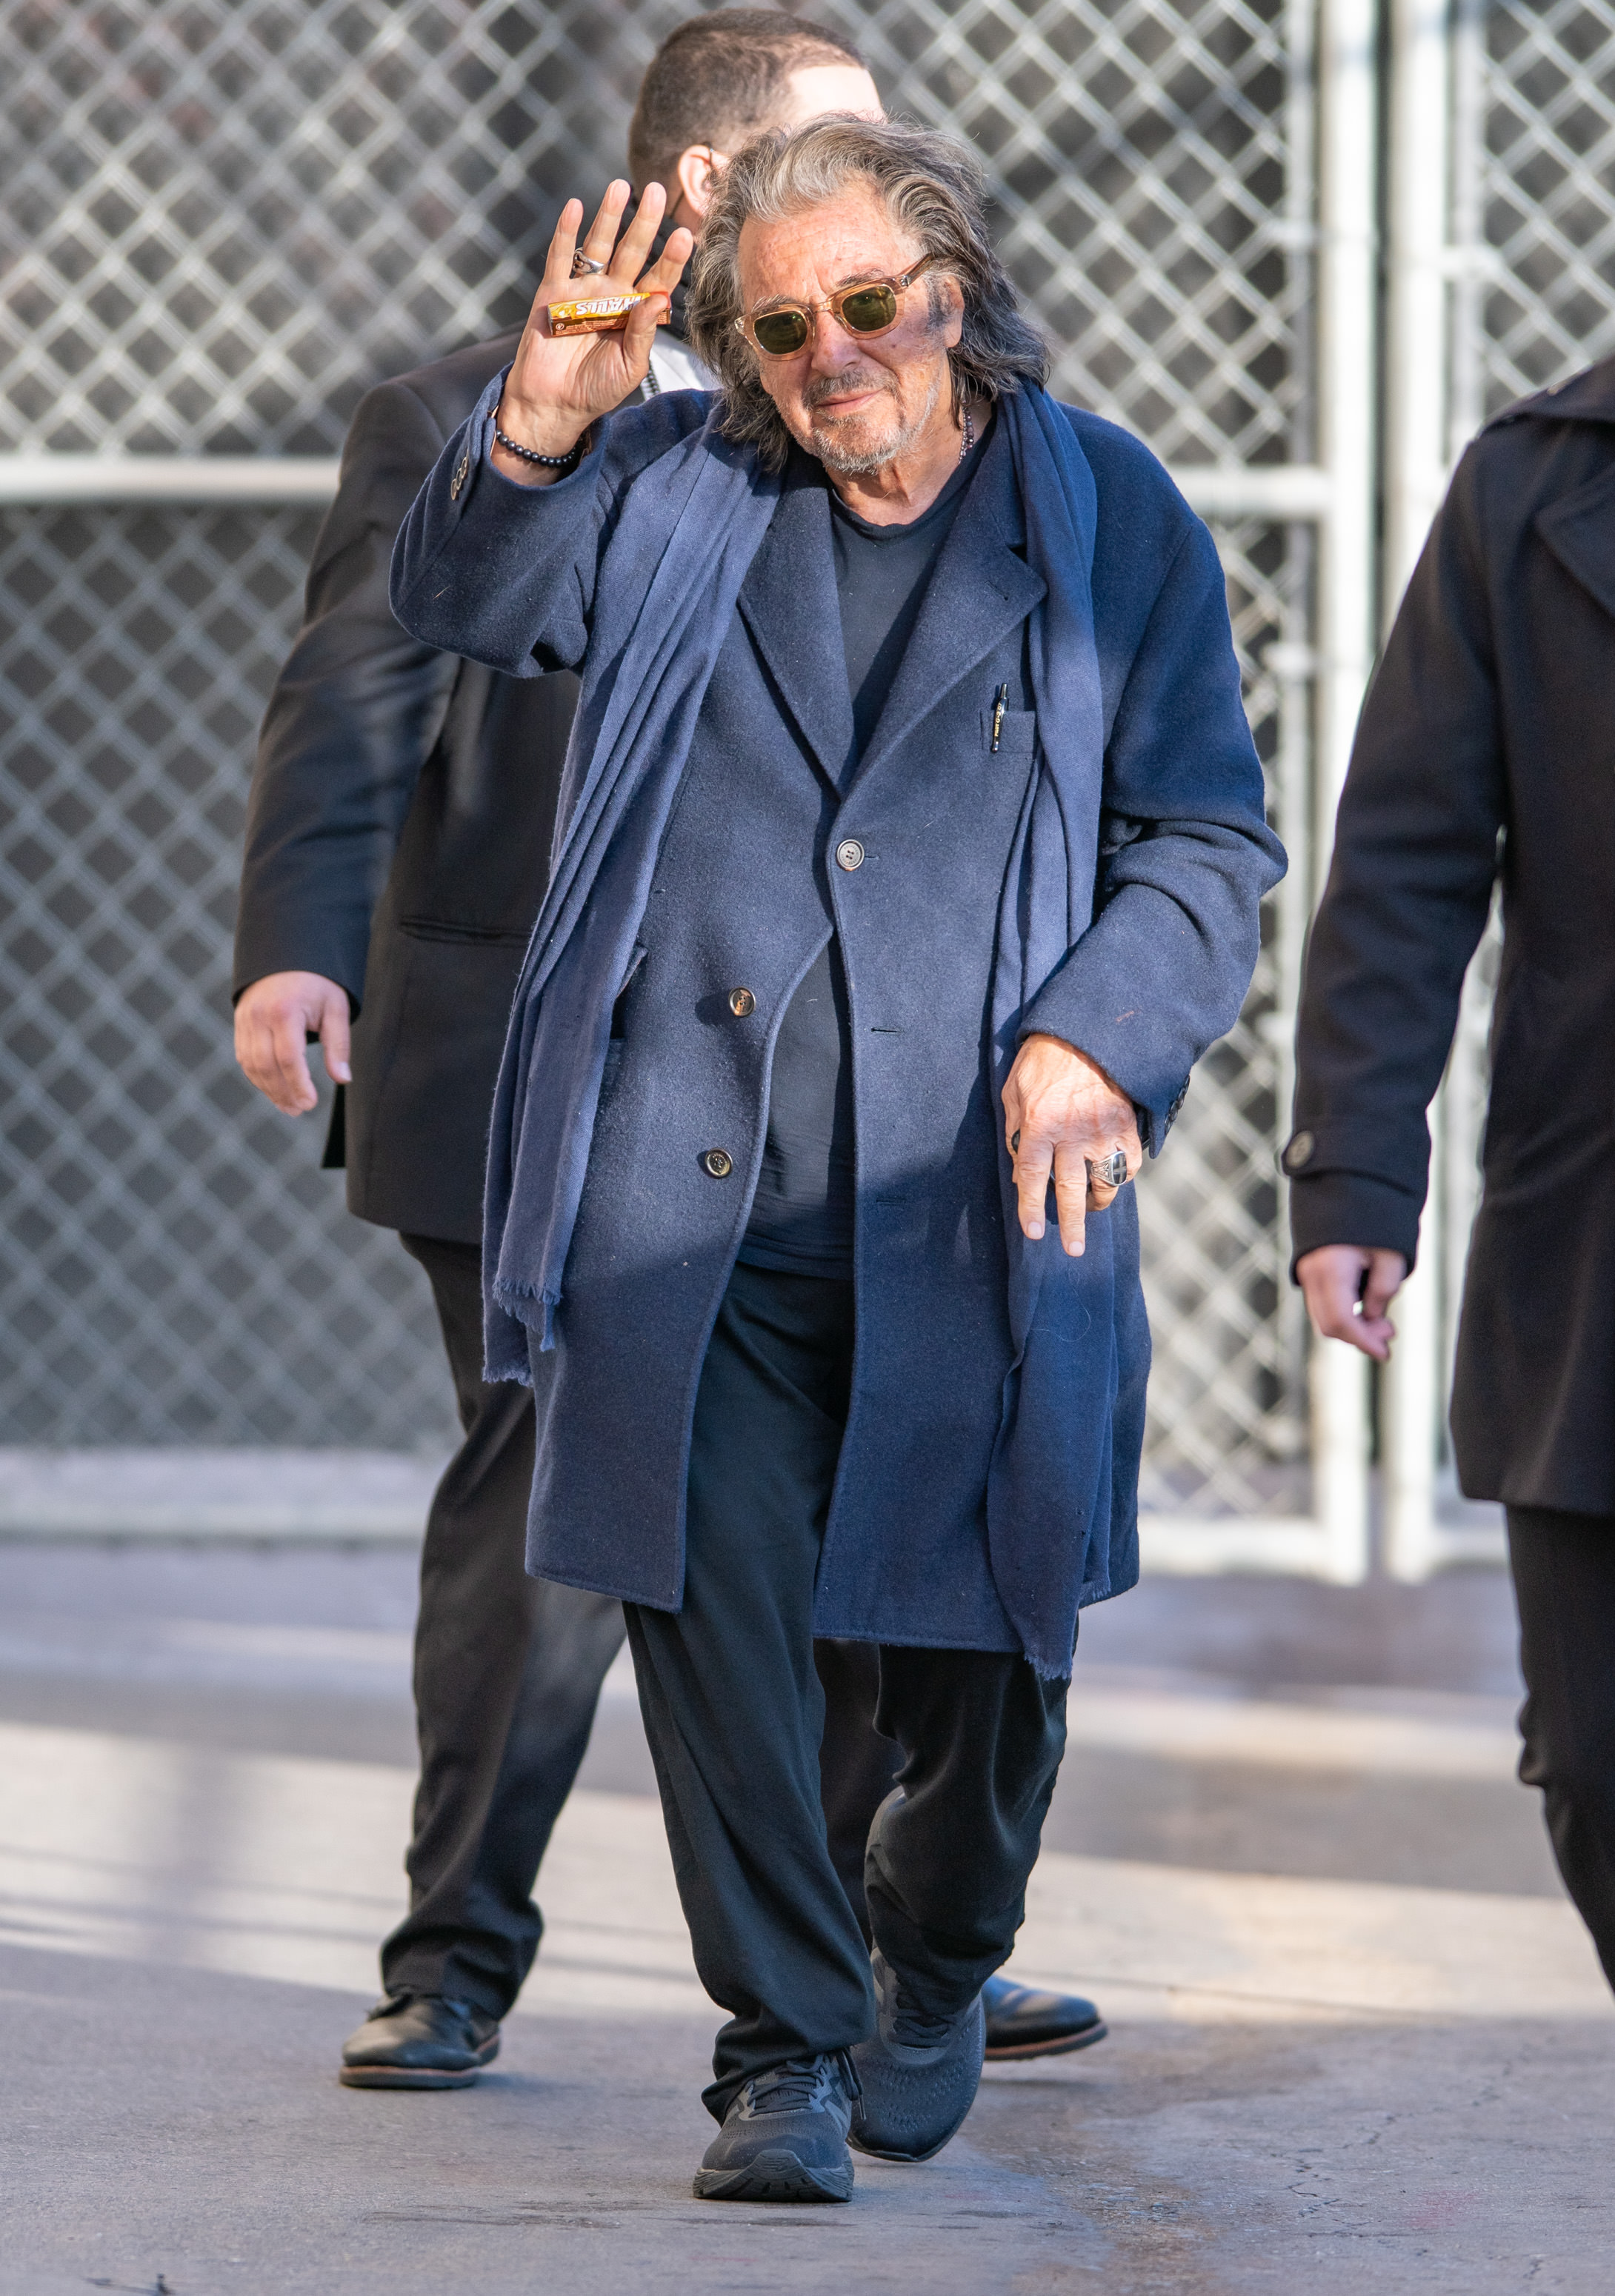 Al Pacino at "Jimmy Kimmel Live" in 2020 | Source: Getty Images